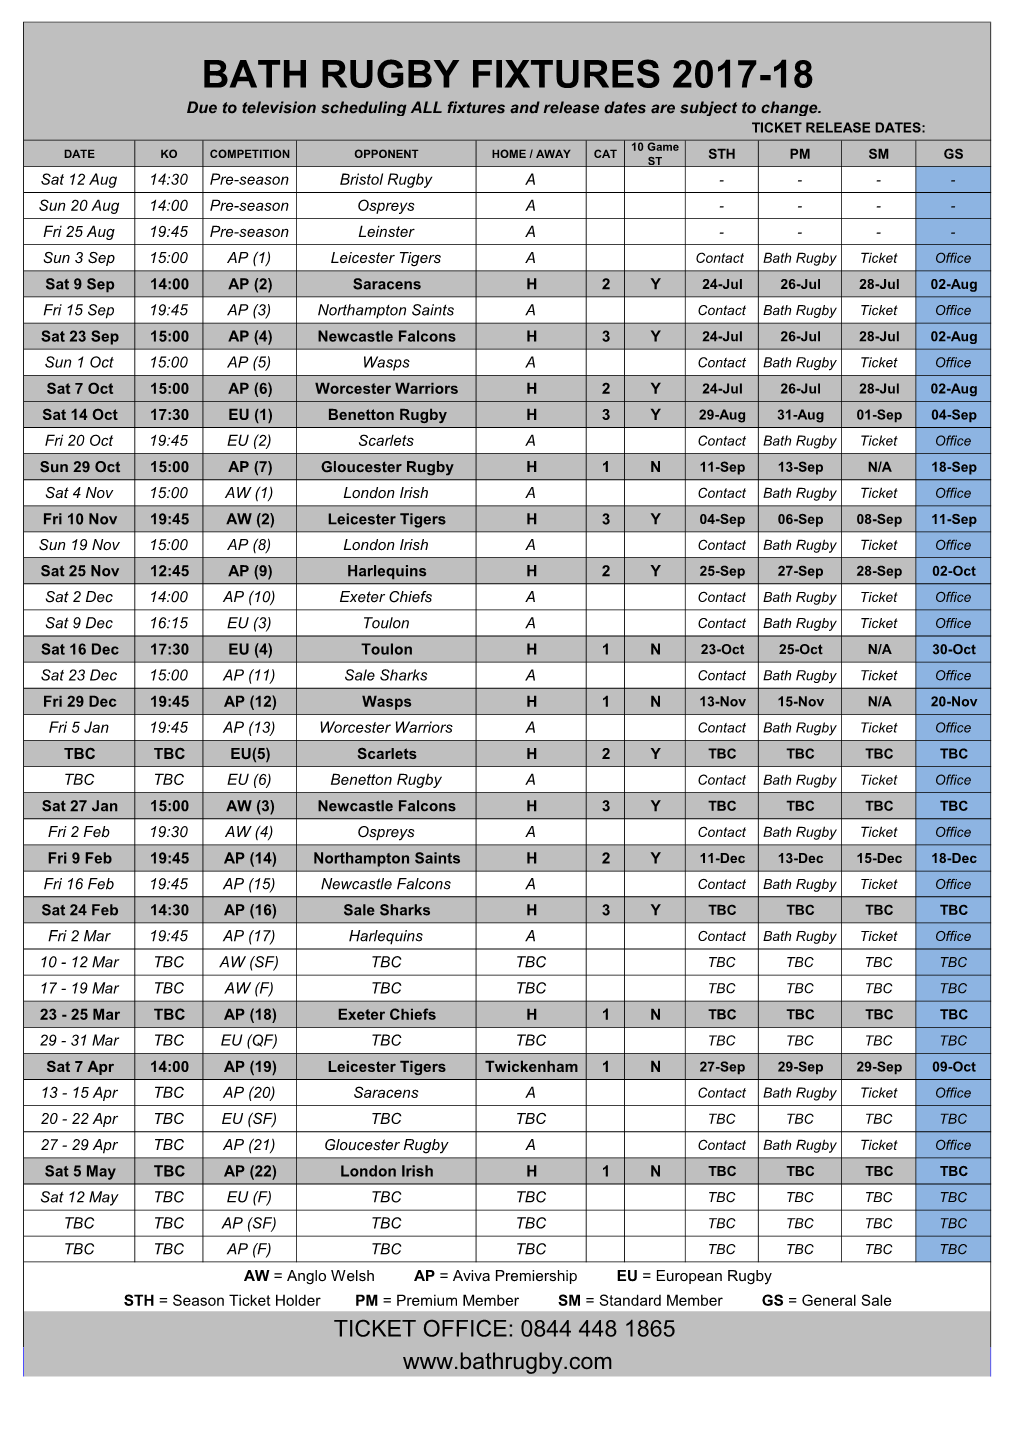 BATH RUGBY FIXTURES 2017-18 Due to Television Scheduling ALL Fixtures and Release Dates Are Subject to Change